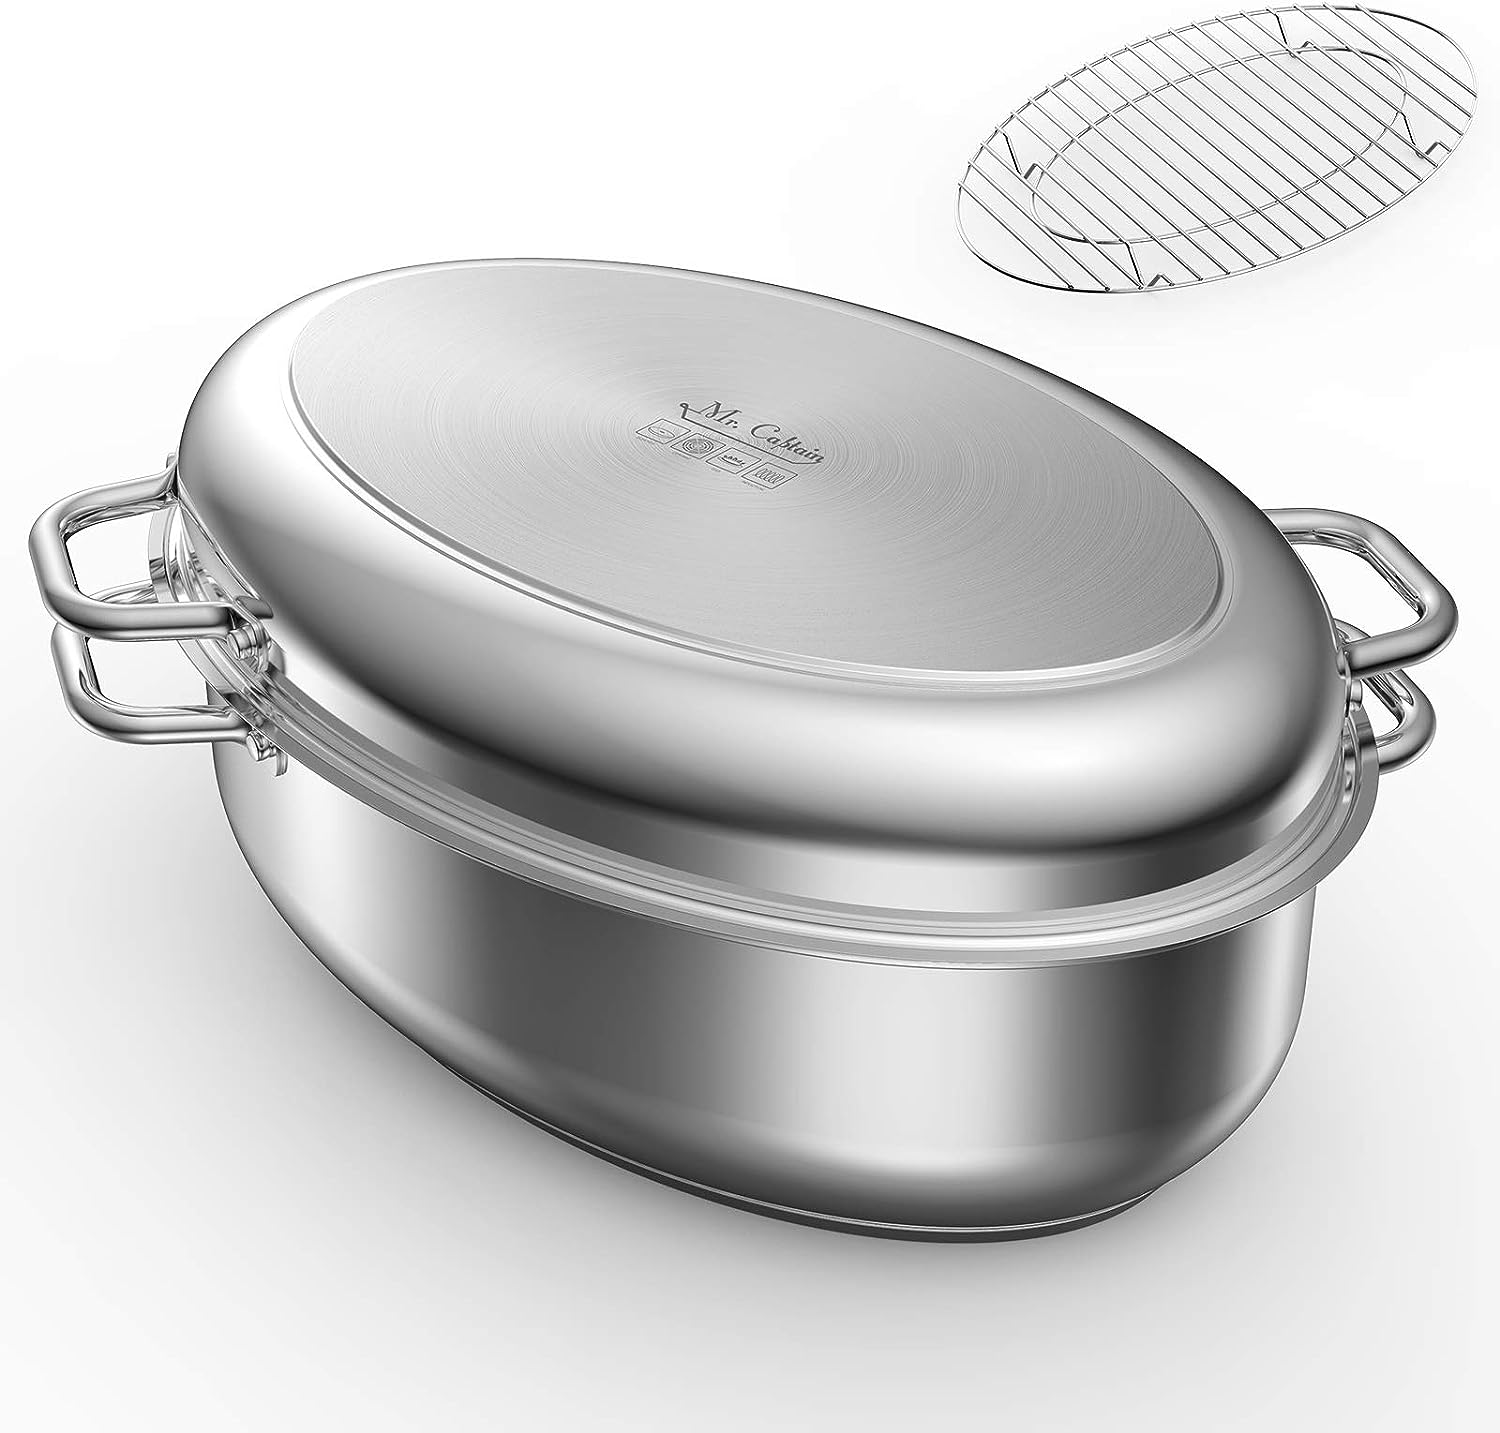 Mr Captain Roasting Pan with Rack and Lid,18/10 Stainless Steel Multi-Use Oval Turkey Roaster,Induction Compatible Dishwasher/Oven Safe Roaster (12 Quart)